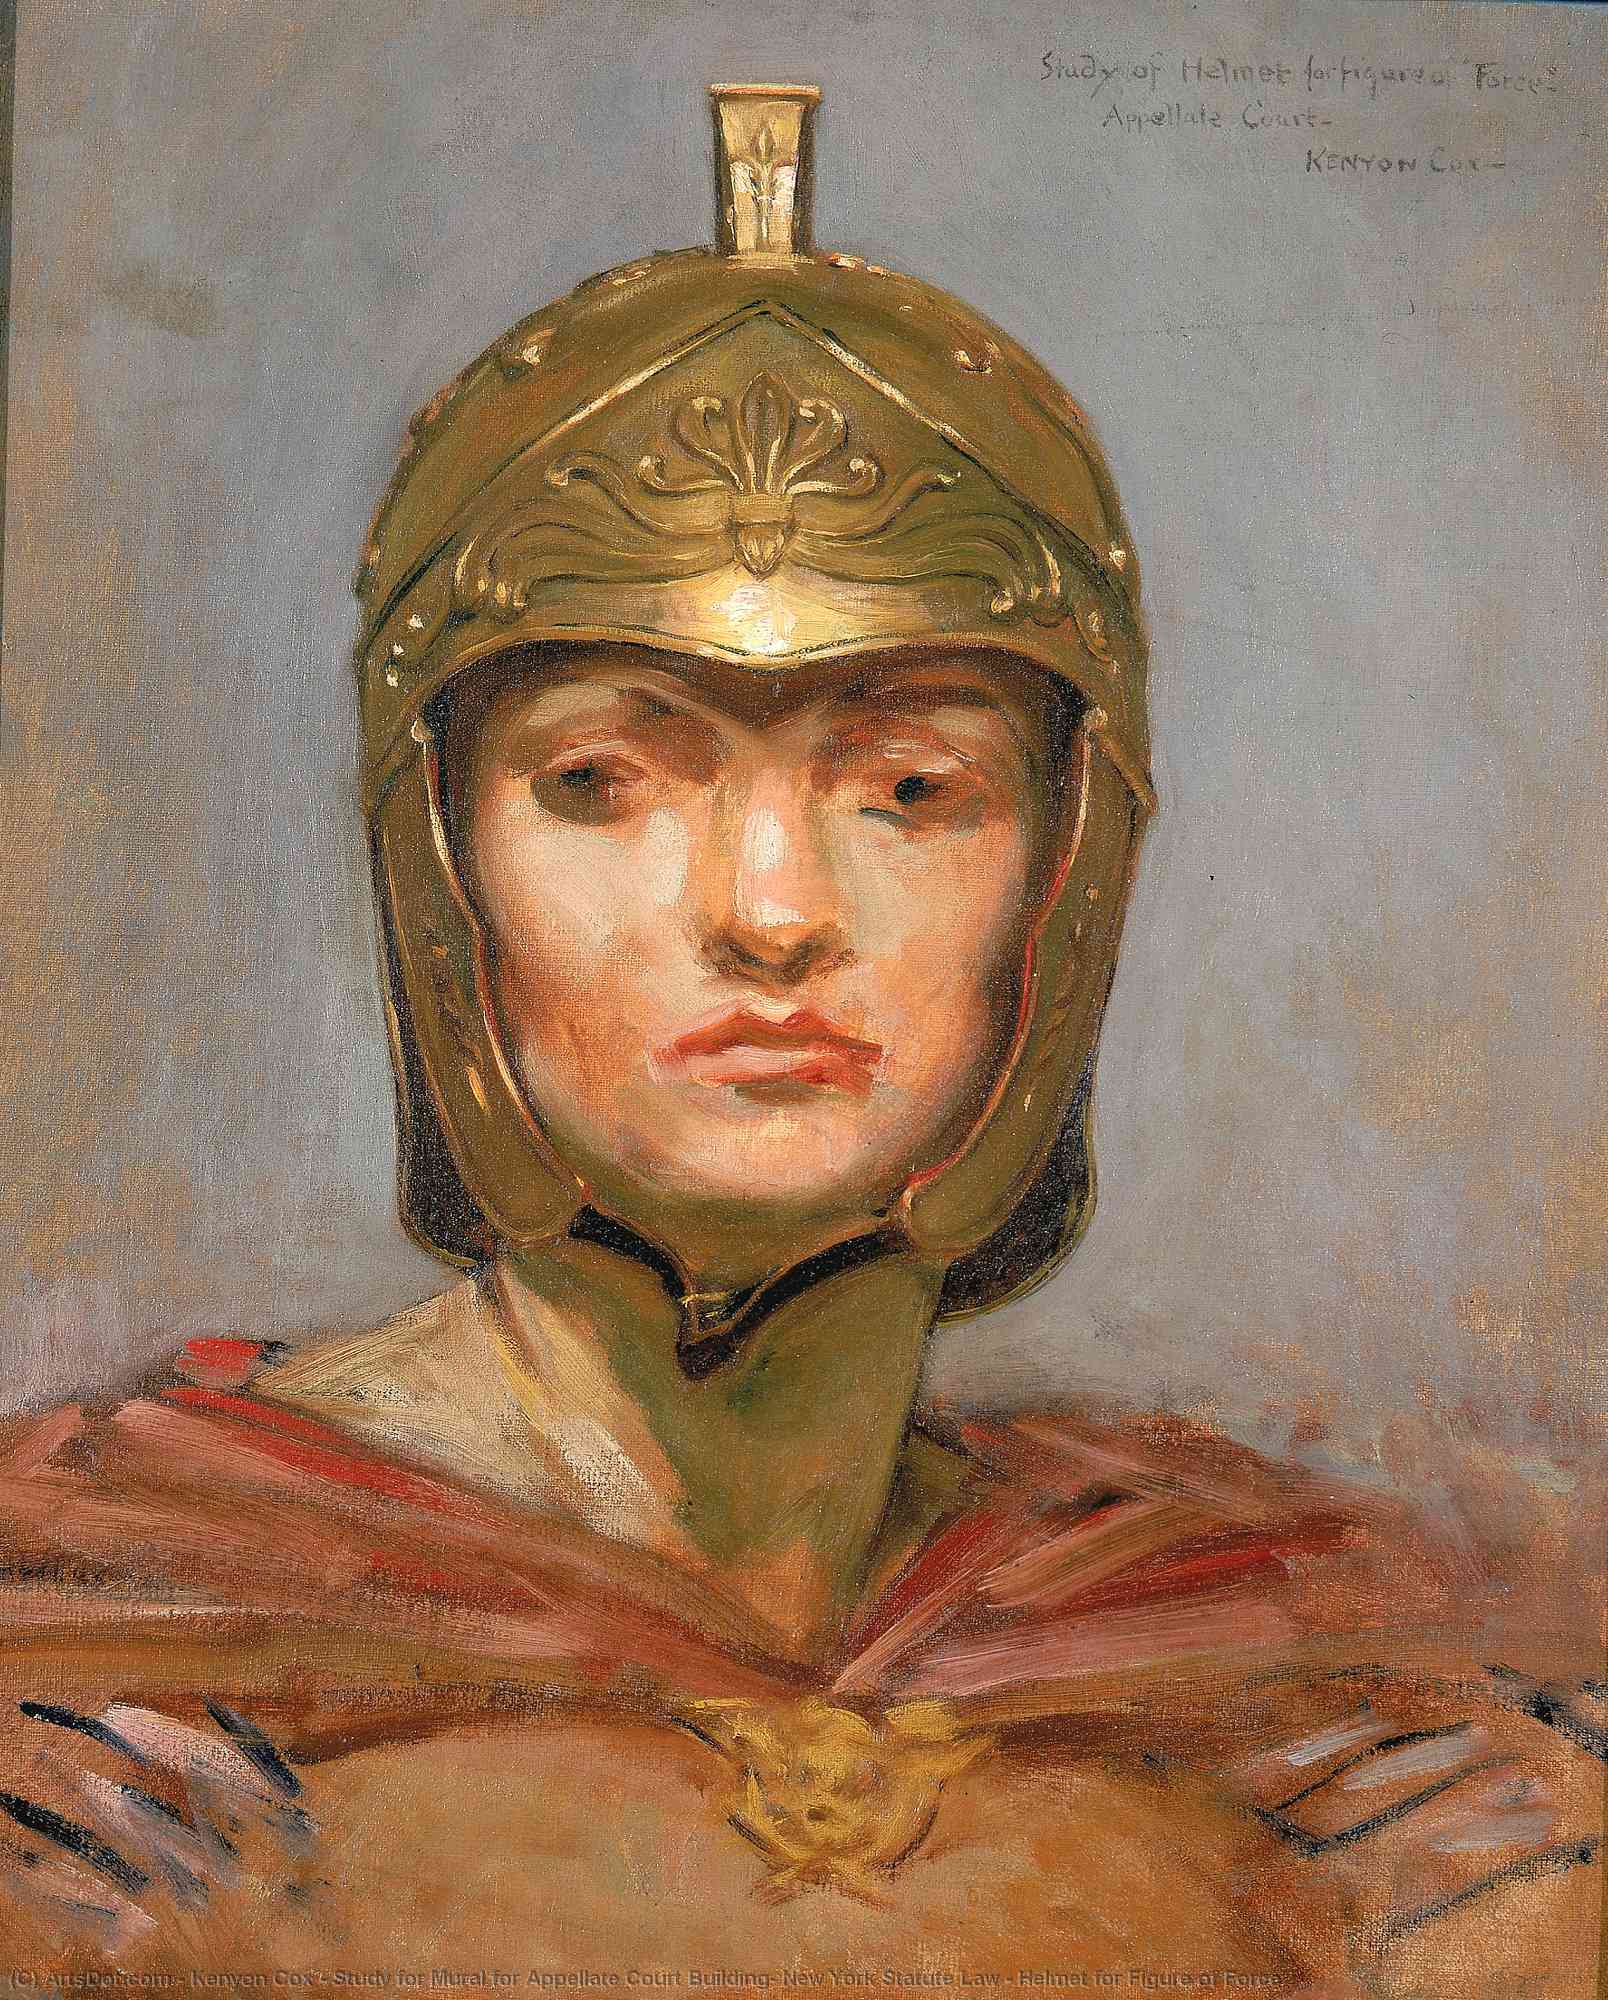 Order Oil Painting Replica Study for Mural for Appellate Court Building, New York Statute Law , Helmet for Figure of Force, 1899 by Kenyon Cox (1856-1919) | ArtsDot.com